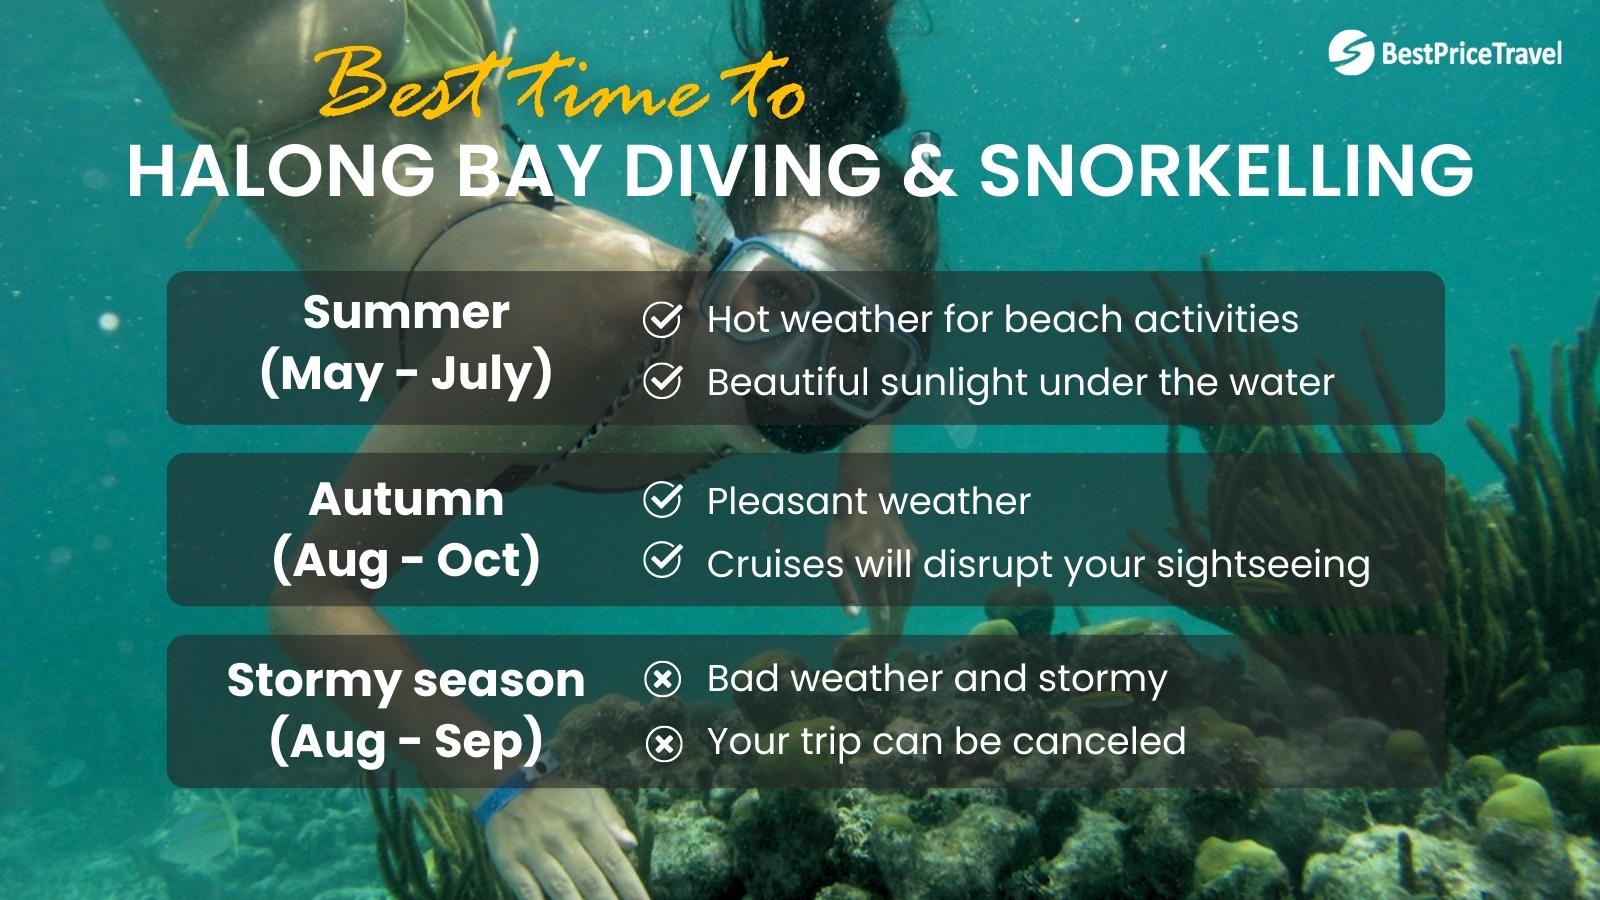 Best Time To Do Halong Bay Scuba Diving & Snorkeling